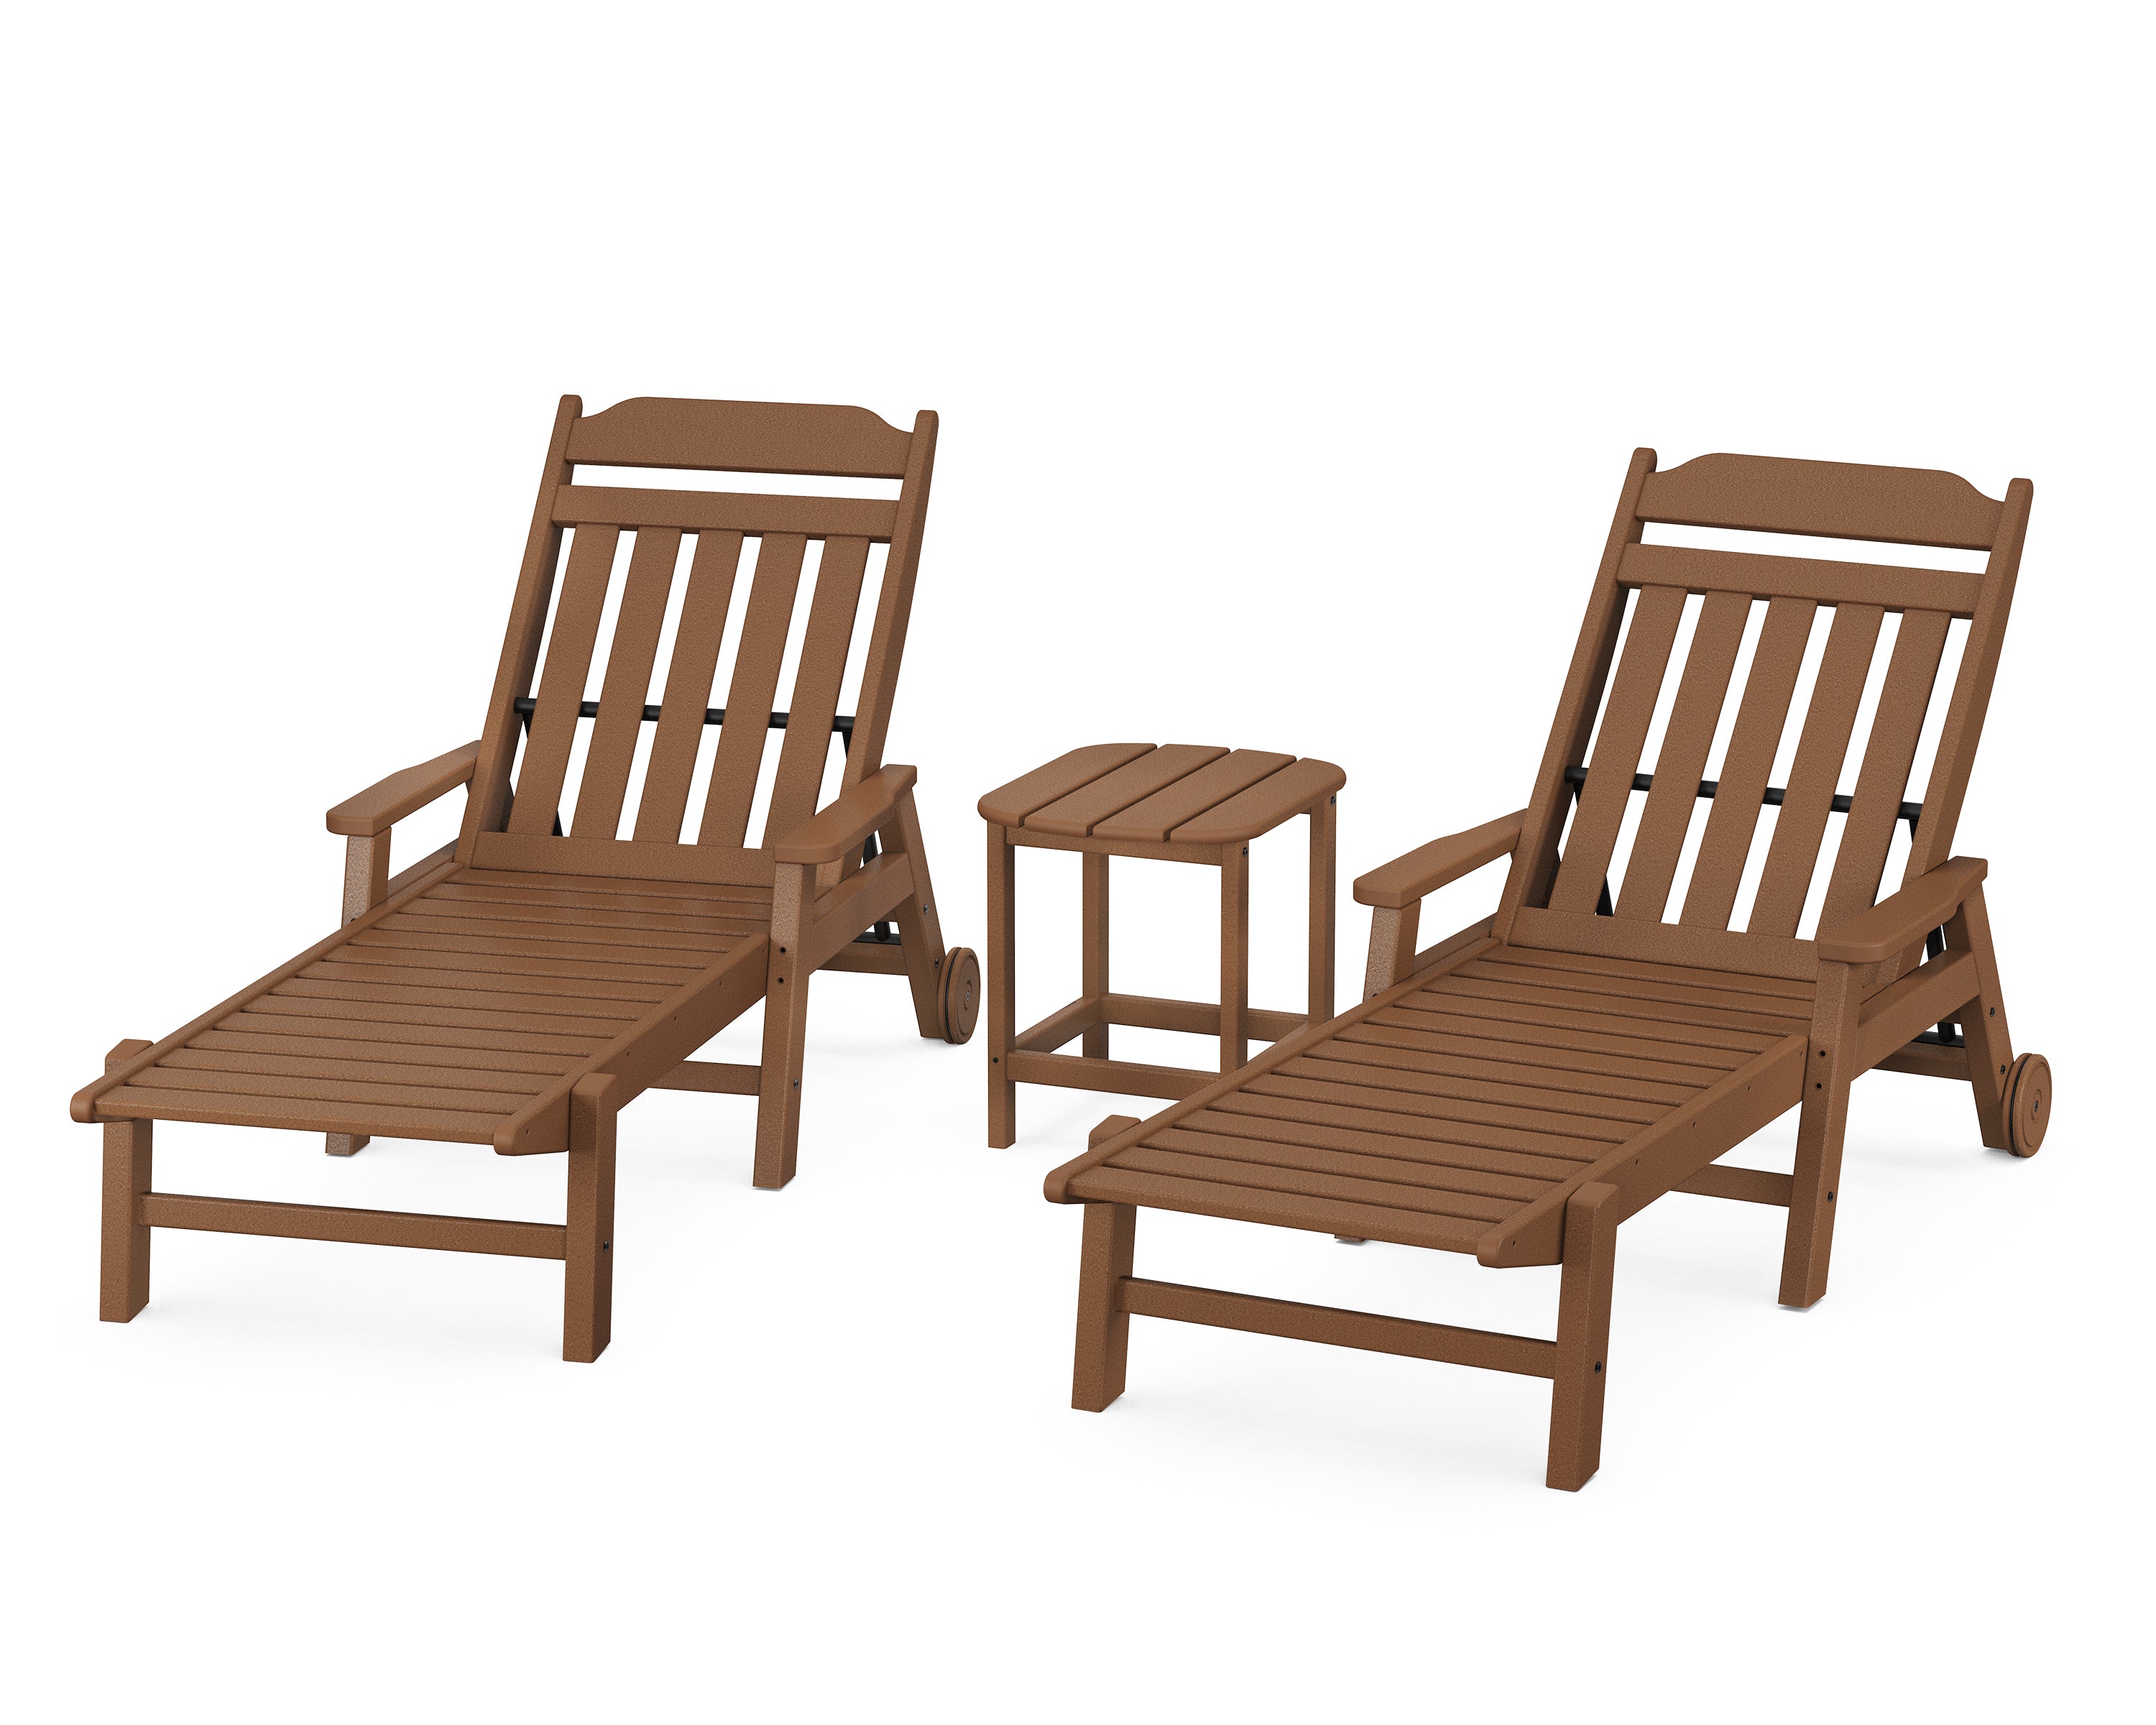 POLYWOOD Country Living 3-Piece Chaise Set with Arms and Wheels in Teak